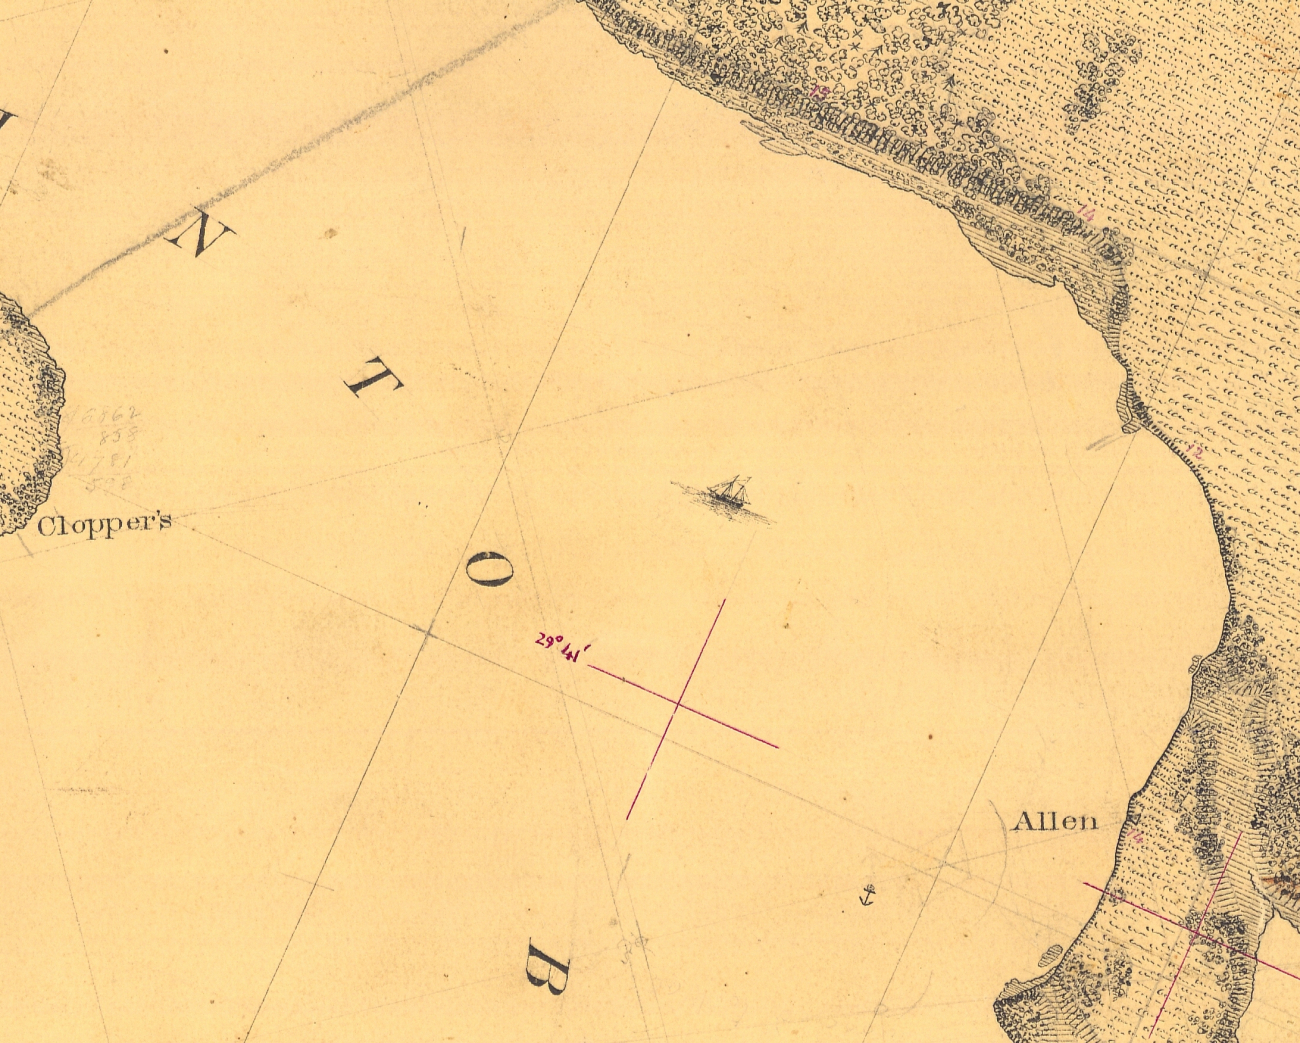 A sketch of a ship was found on Topographic Survey T-331 of Galveston Bay